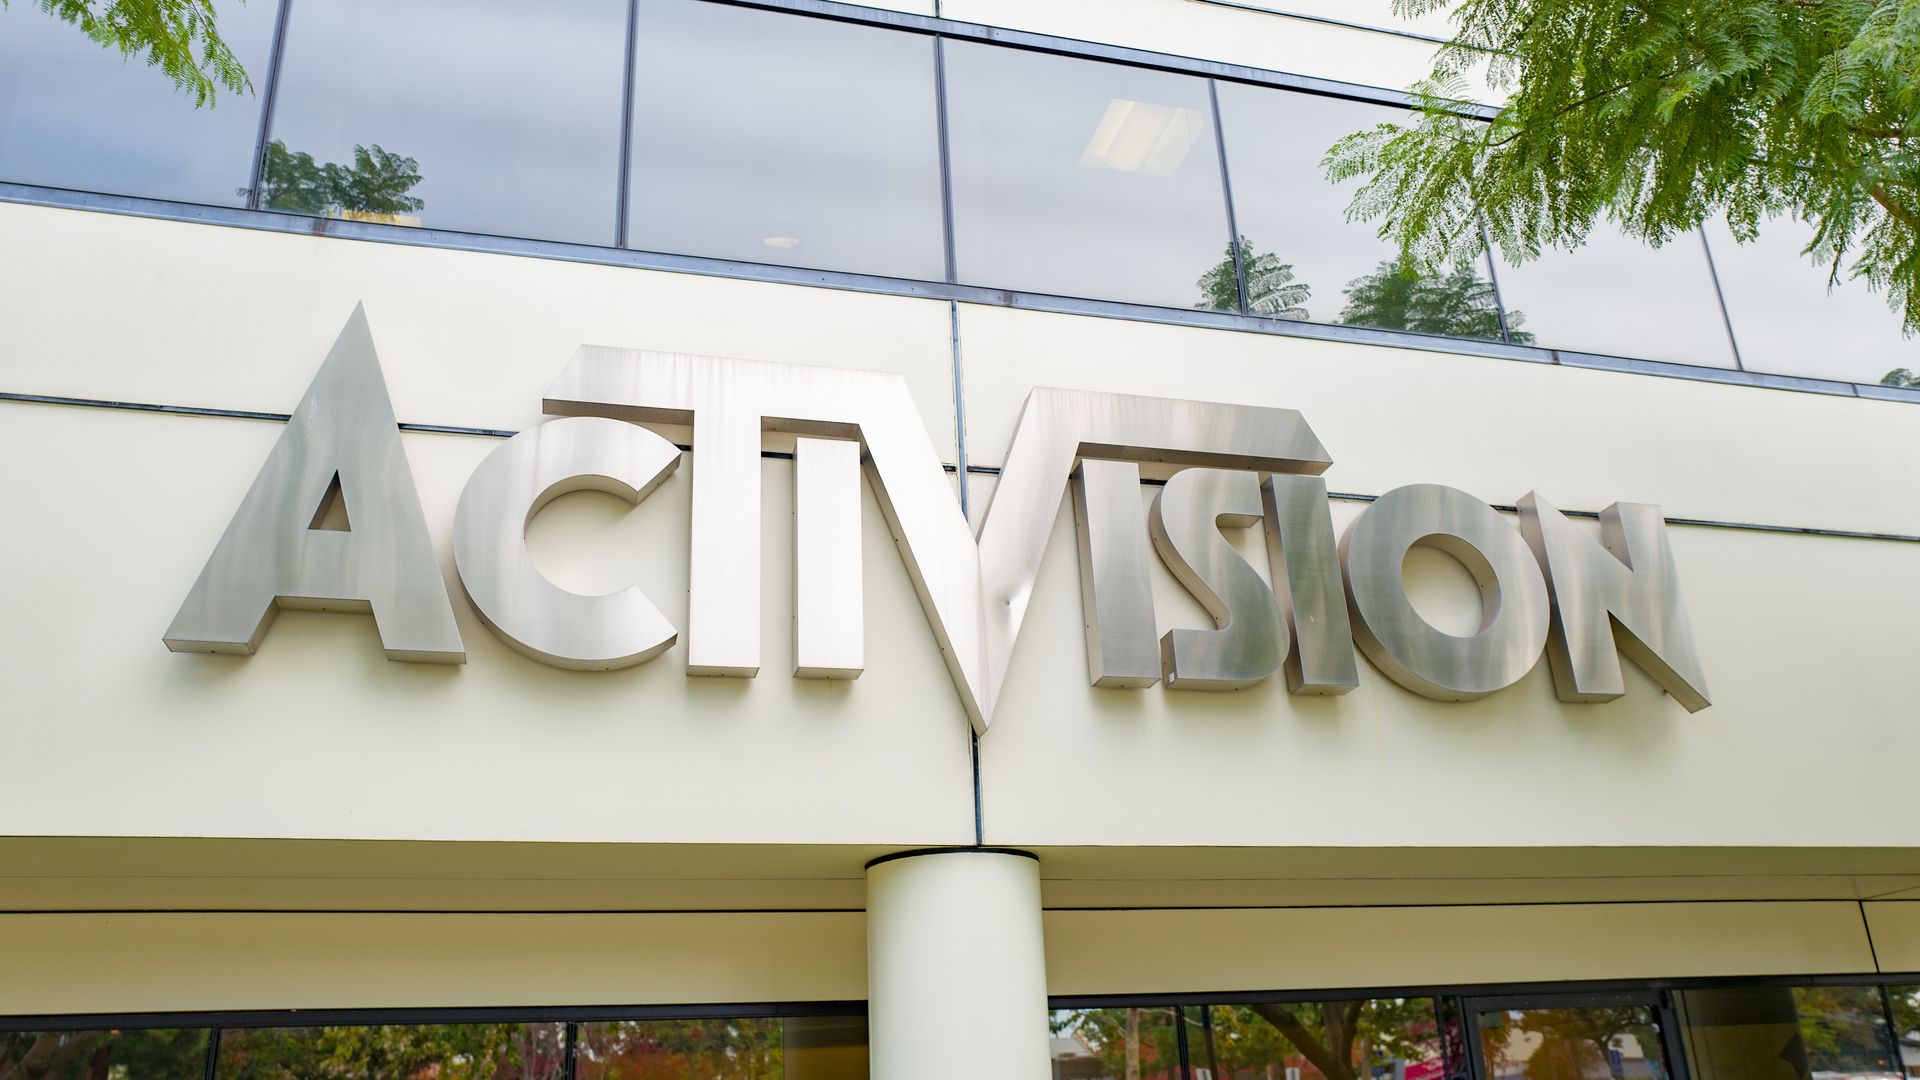 Activision to set up $18M victims fund in response to harassment suit